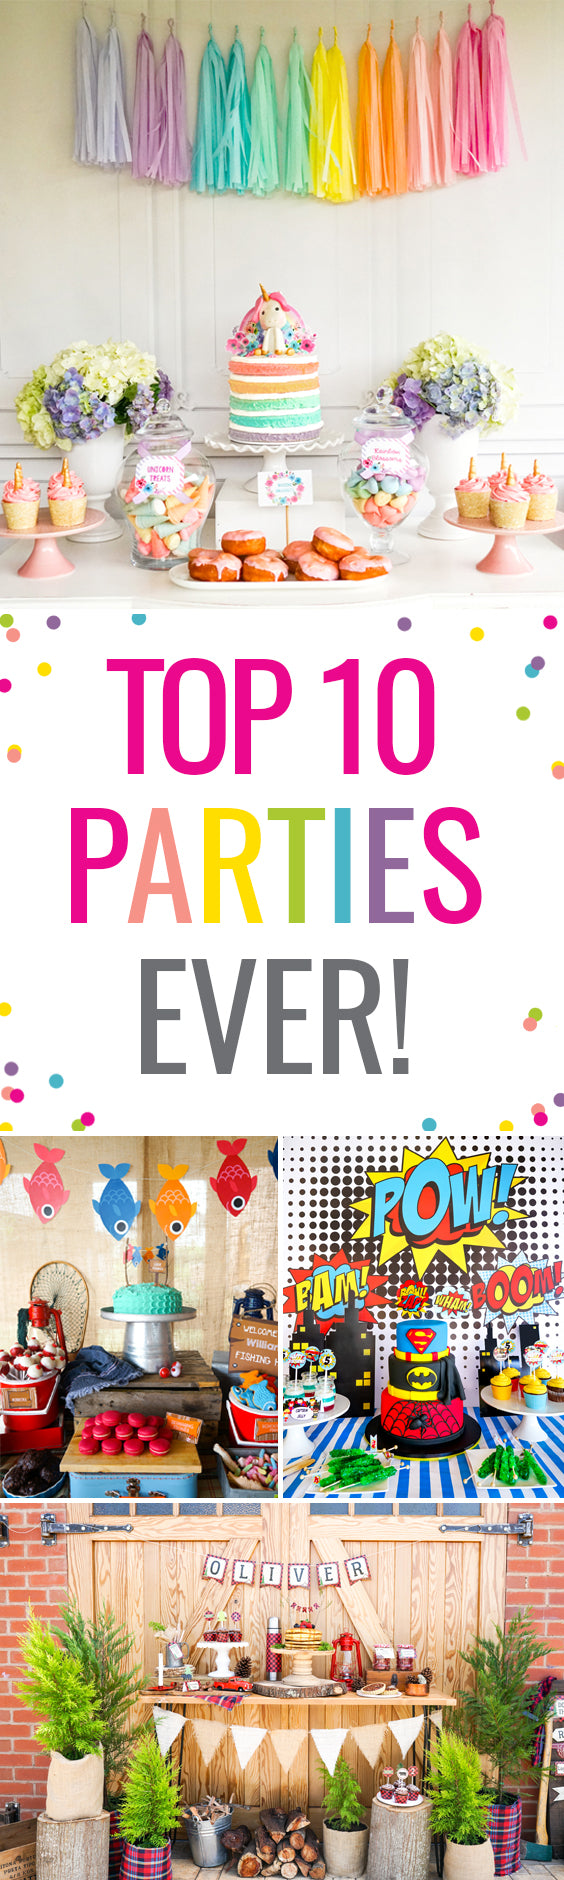 Top 10 Kid's Party Favors